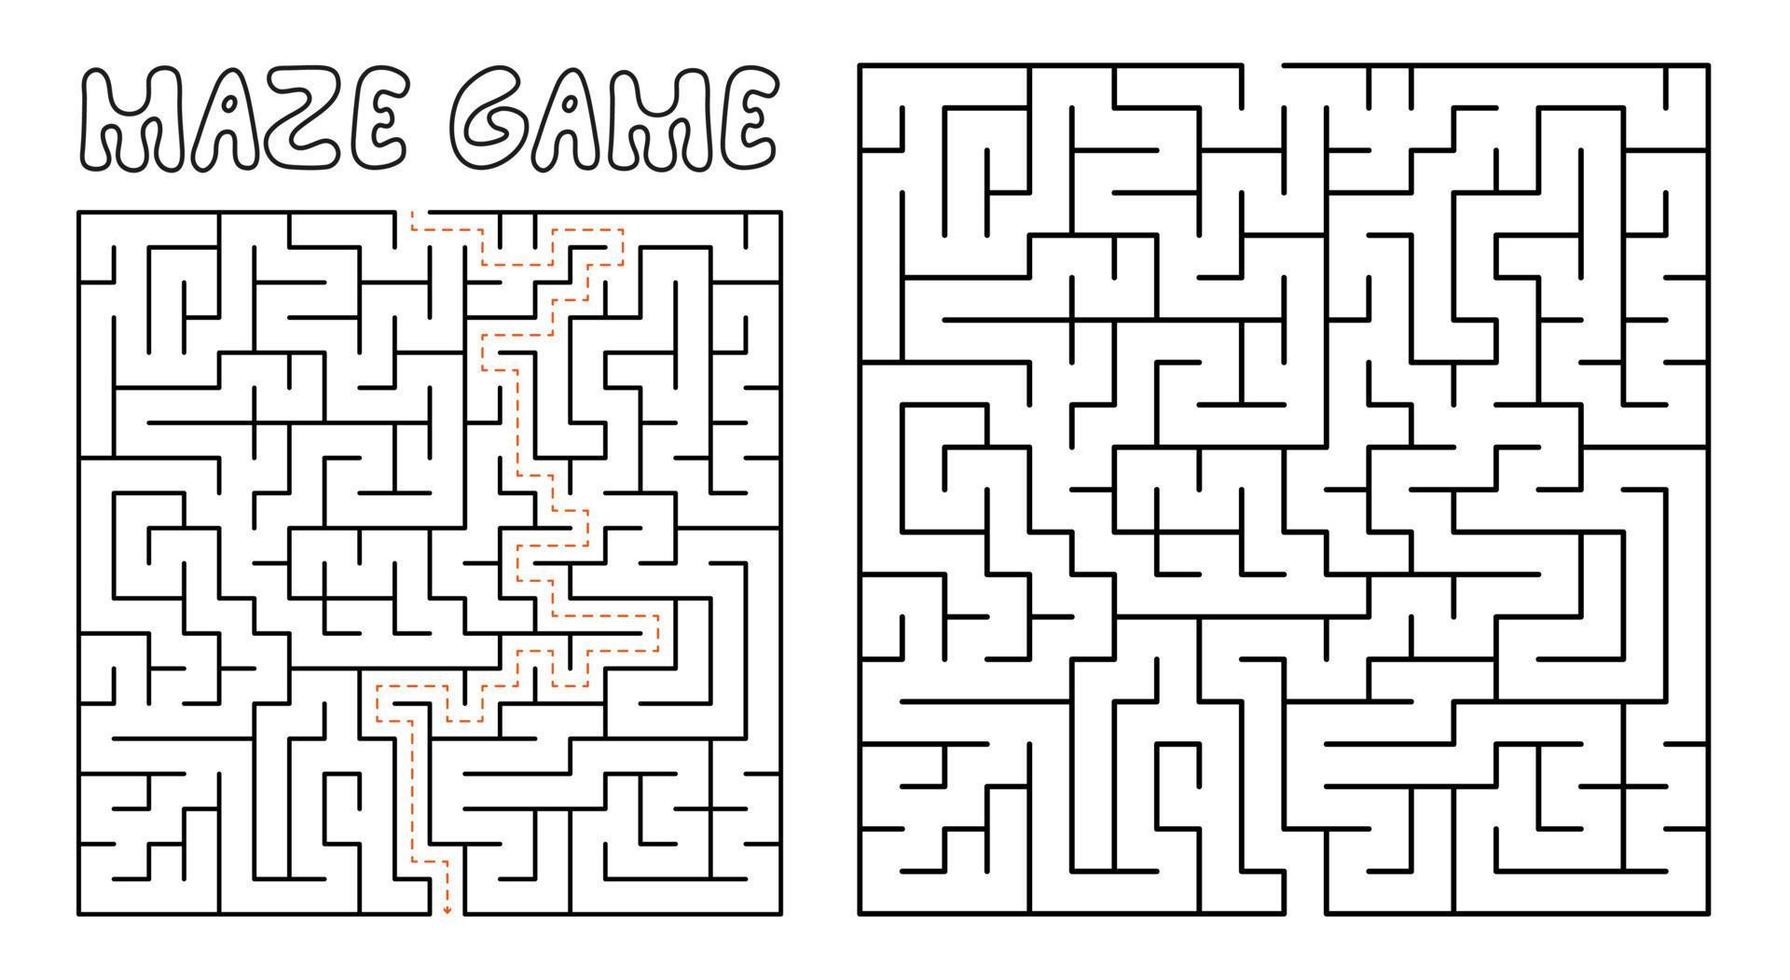 Maze game for kids. Complex Maze puzzle with solution vector